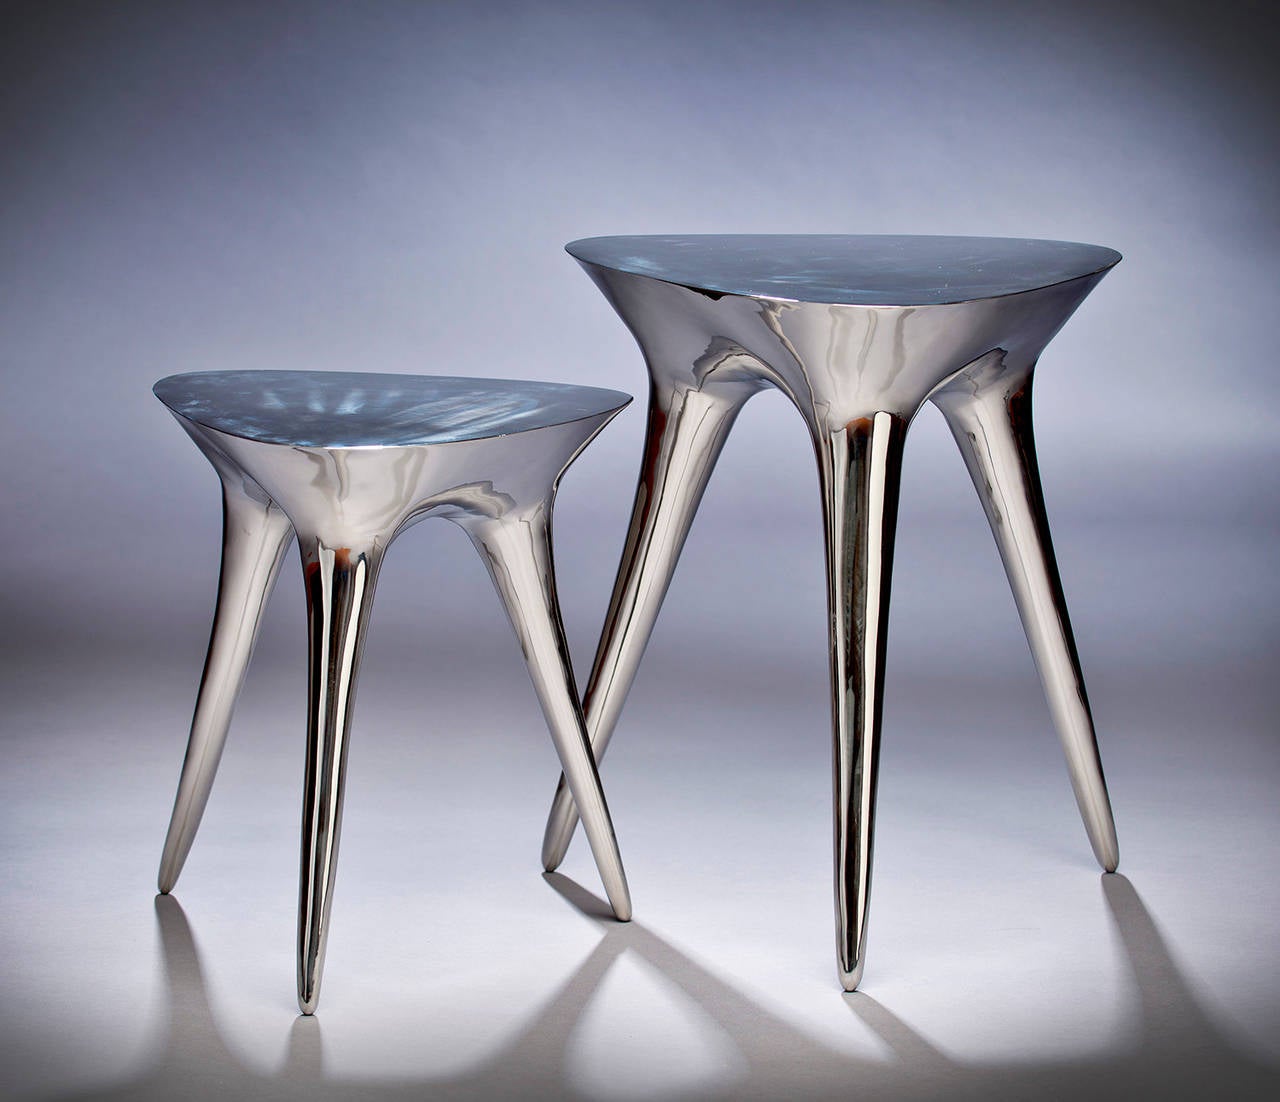 Chrome 8 Tables by Timothy Schreiber are stainless steel end tables polished to a mirror finish. 

Chrome eight tables are from an edition of 12. 

Timothy Schreiber initially trained in cabinet making in Germany before studying architecture and